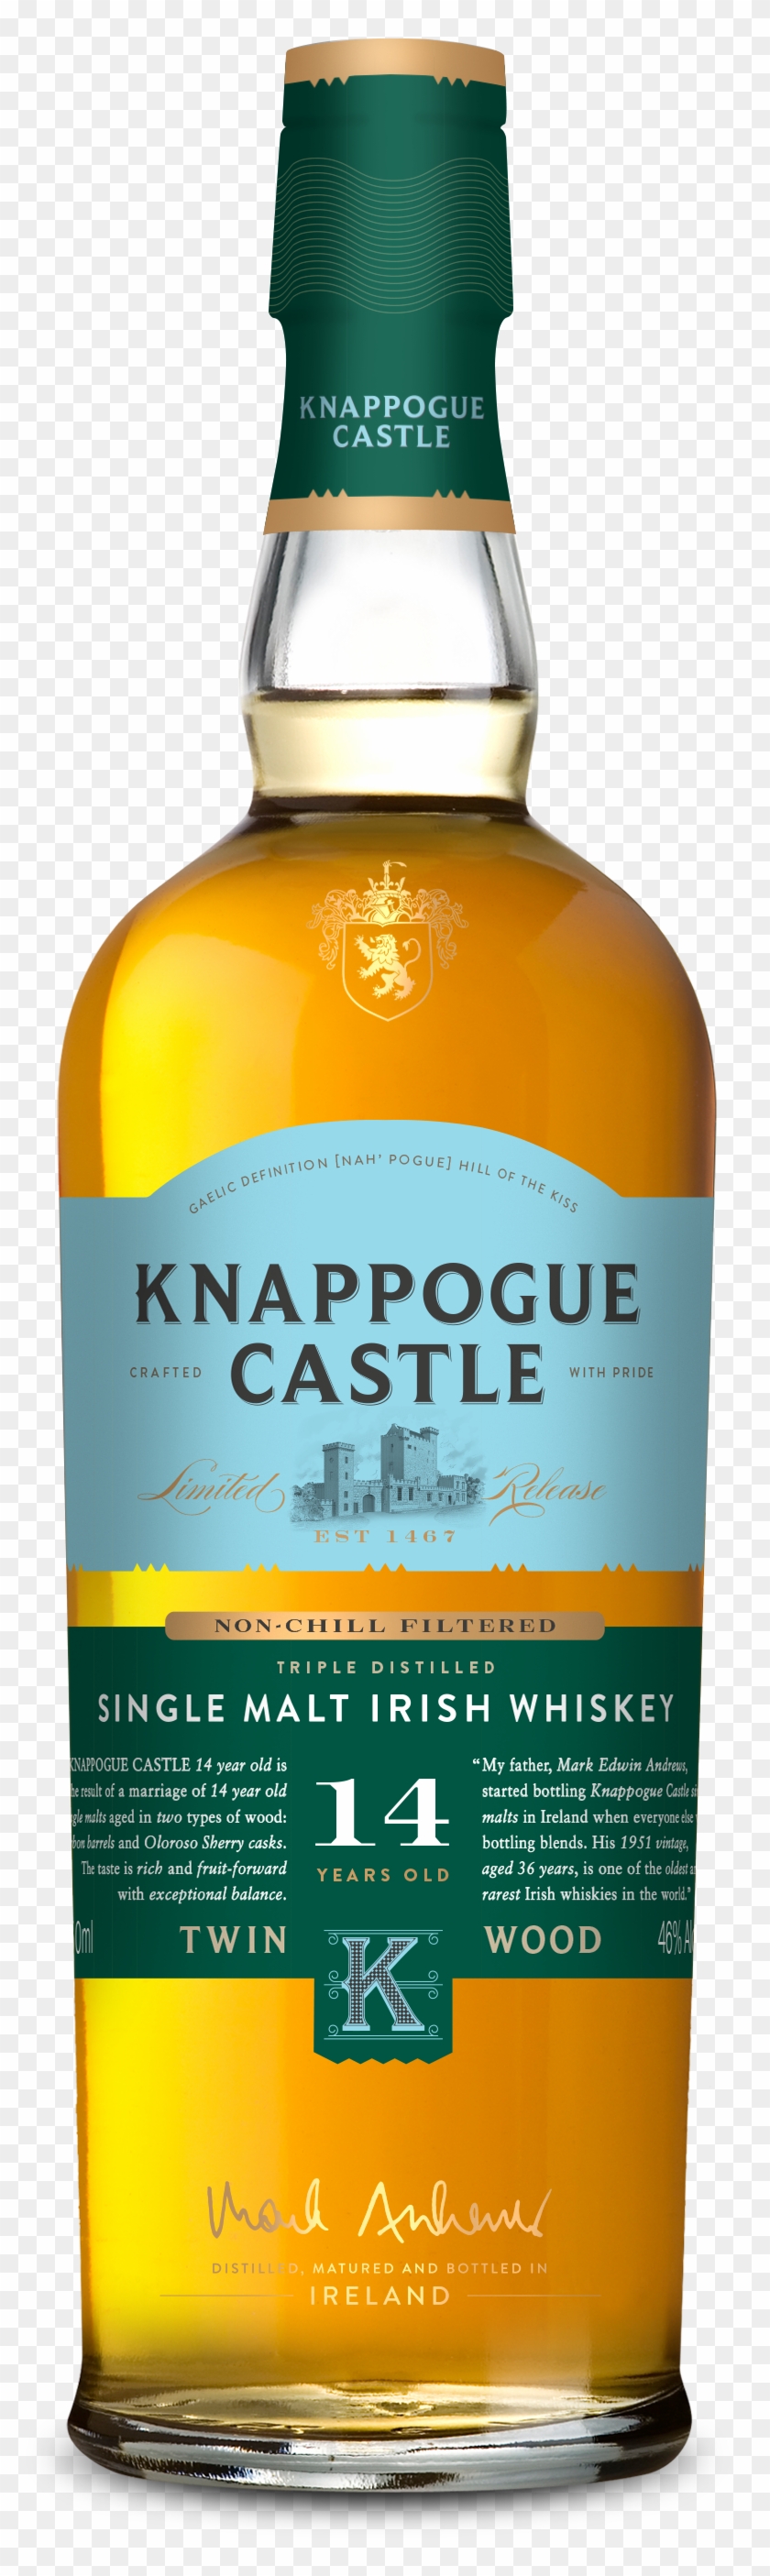 Your Home Is Your Castle - Knappogue Castle Whiskey #1690306